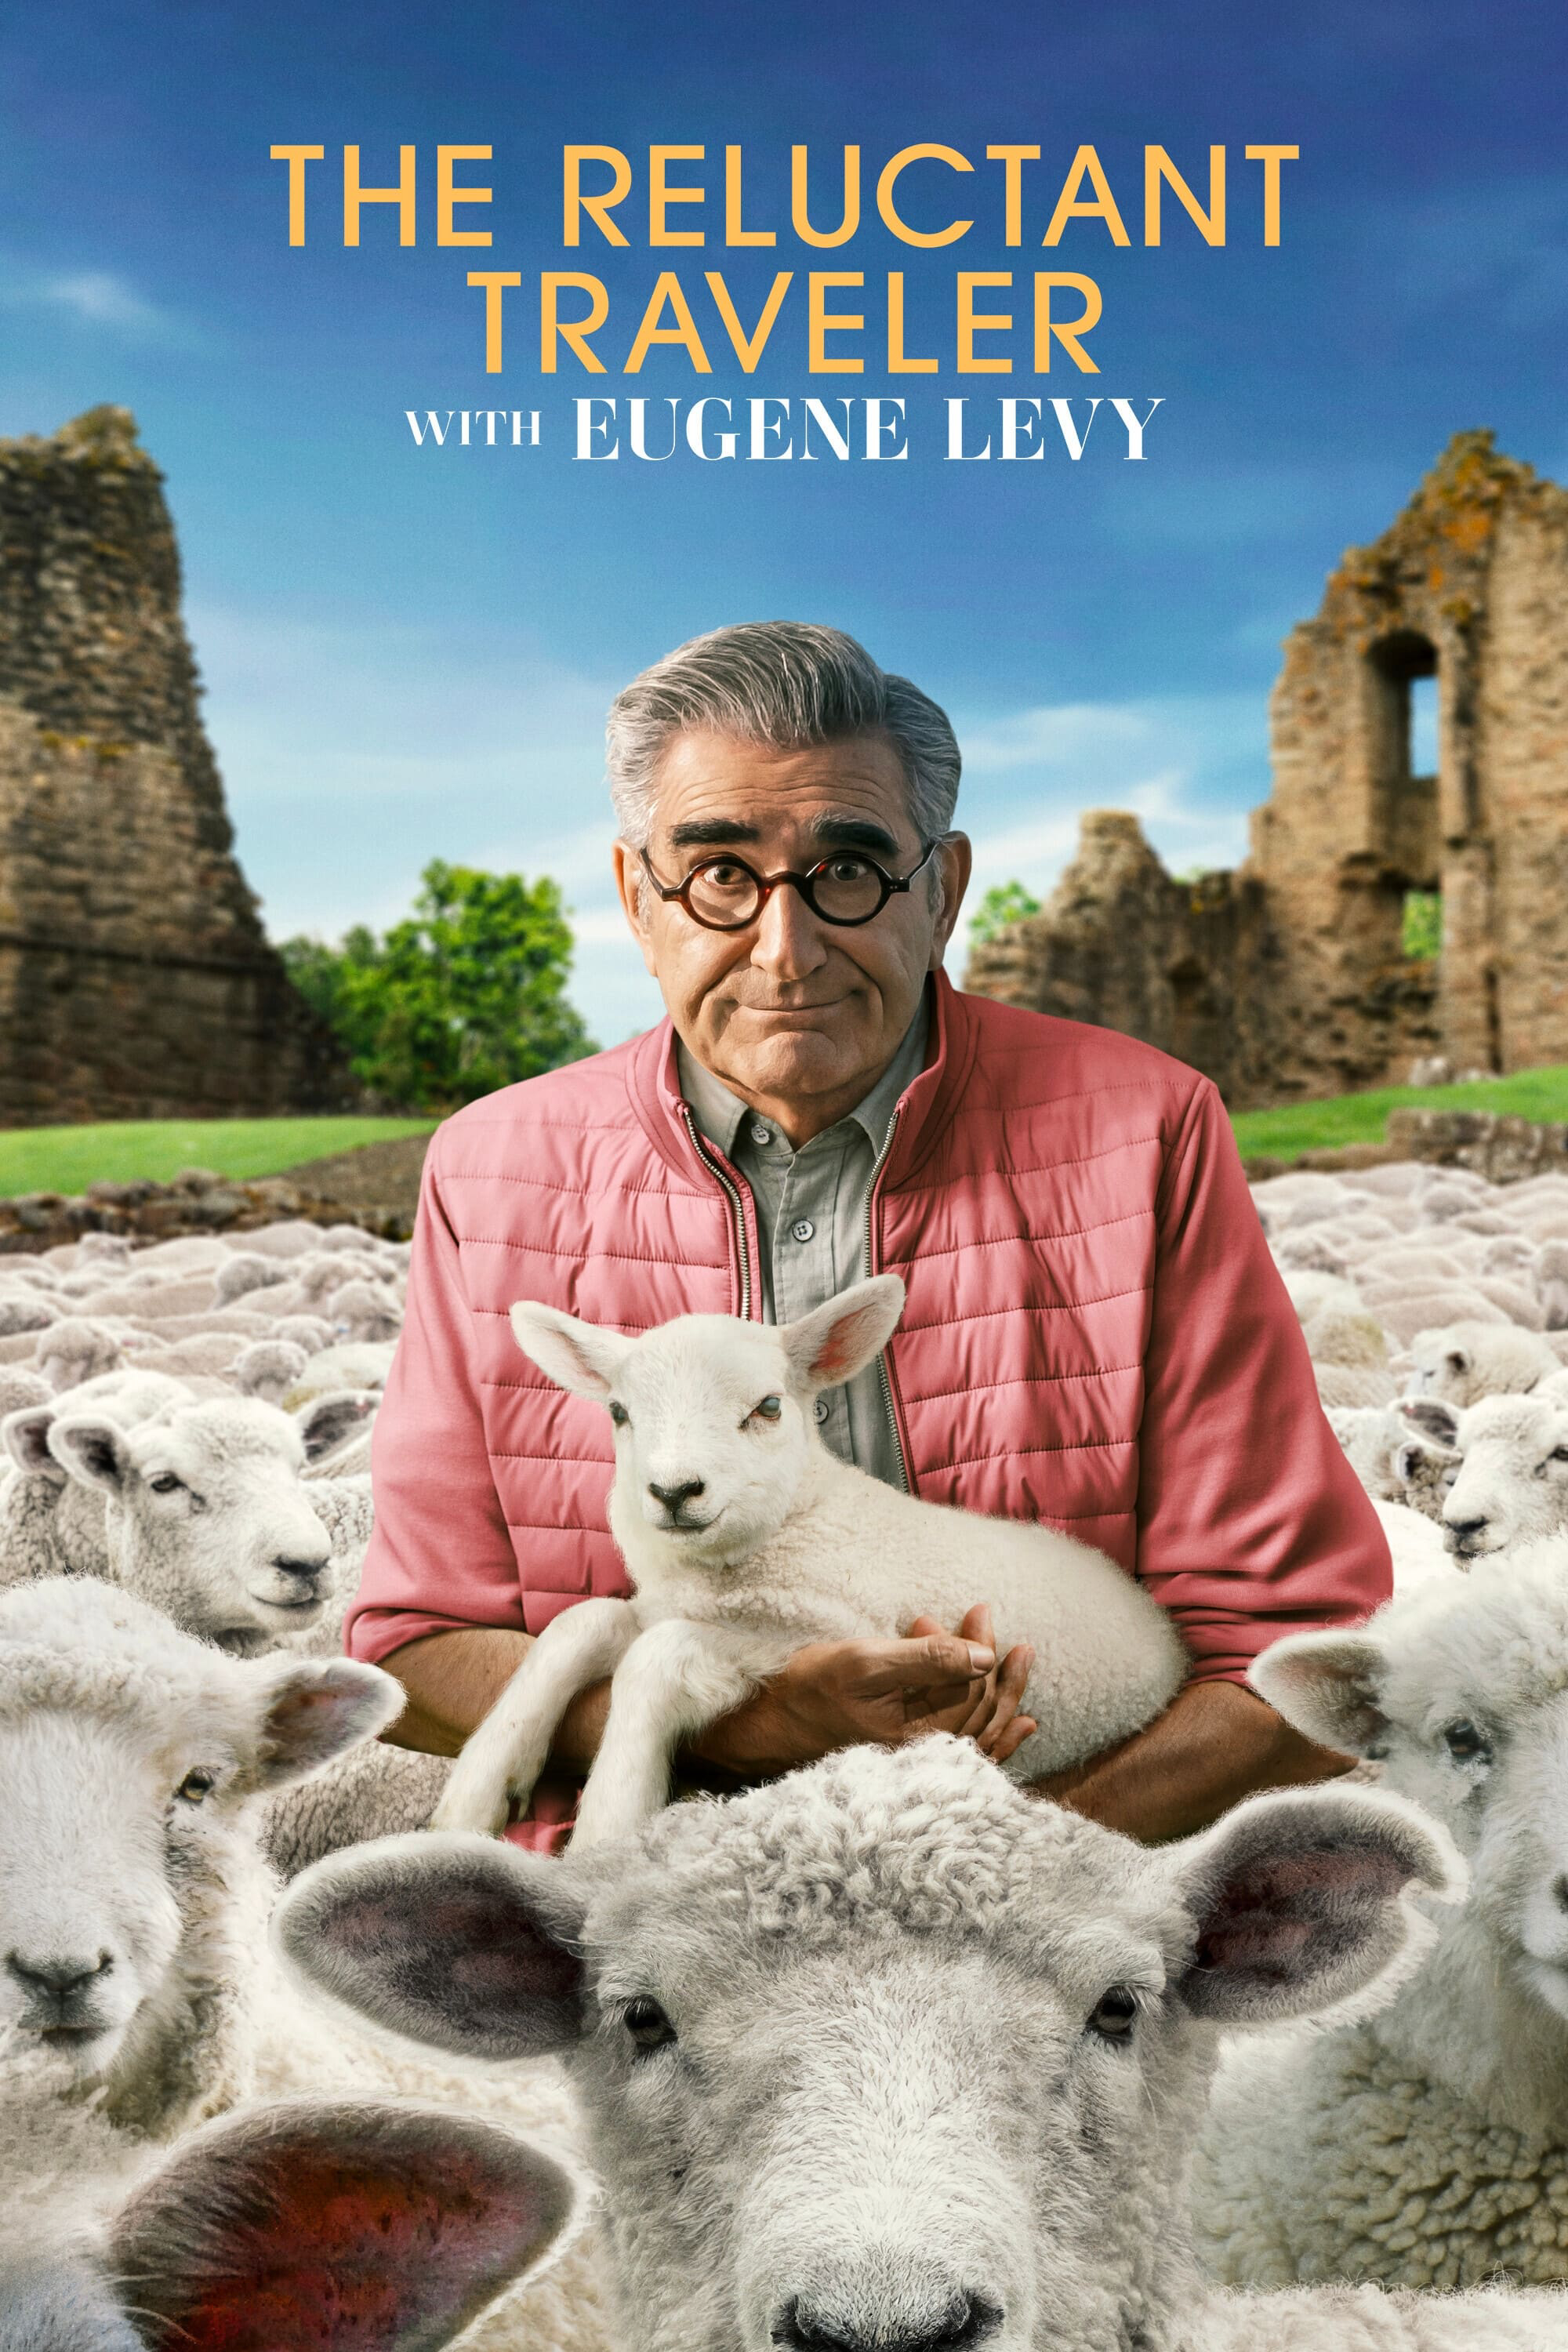 Xem Phim Eugene Levy, Vị Lữ Khách Miễn Cưỡng (Phần 2) (The Reluctant Traveler with Eugene Levy)